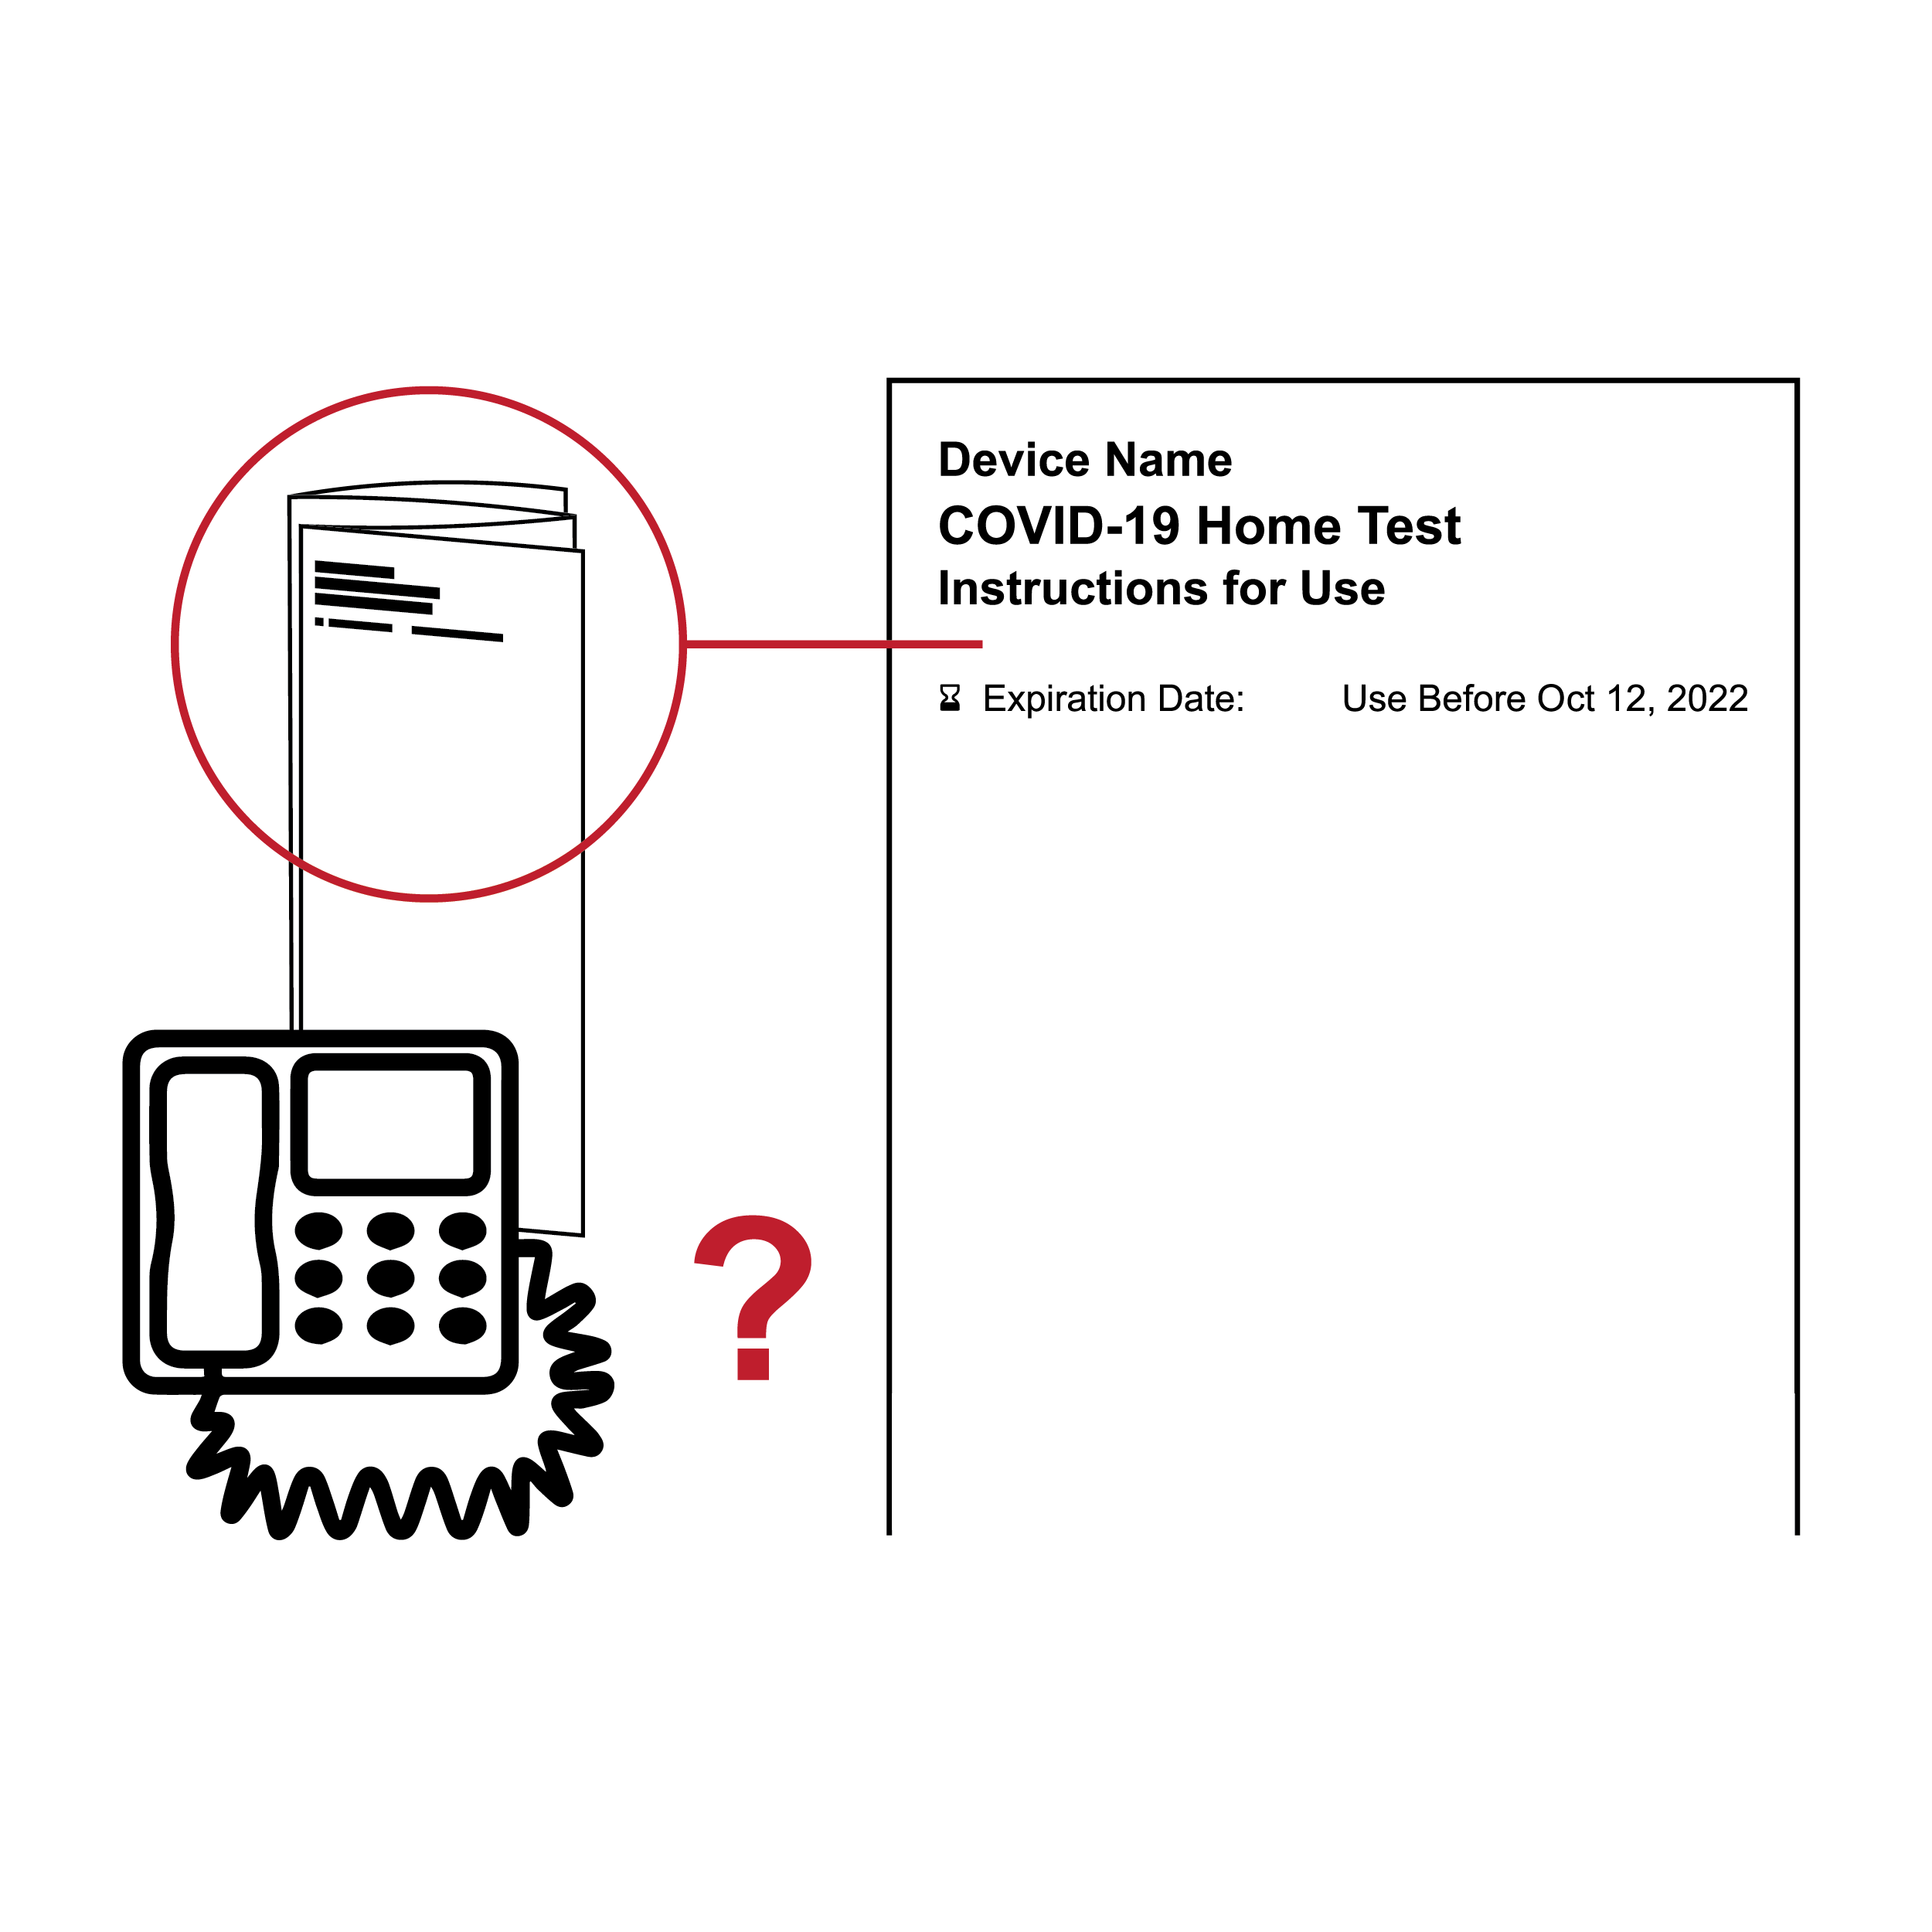 Test instructions without a customer service phone number for accessing information via IVR system.